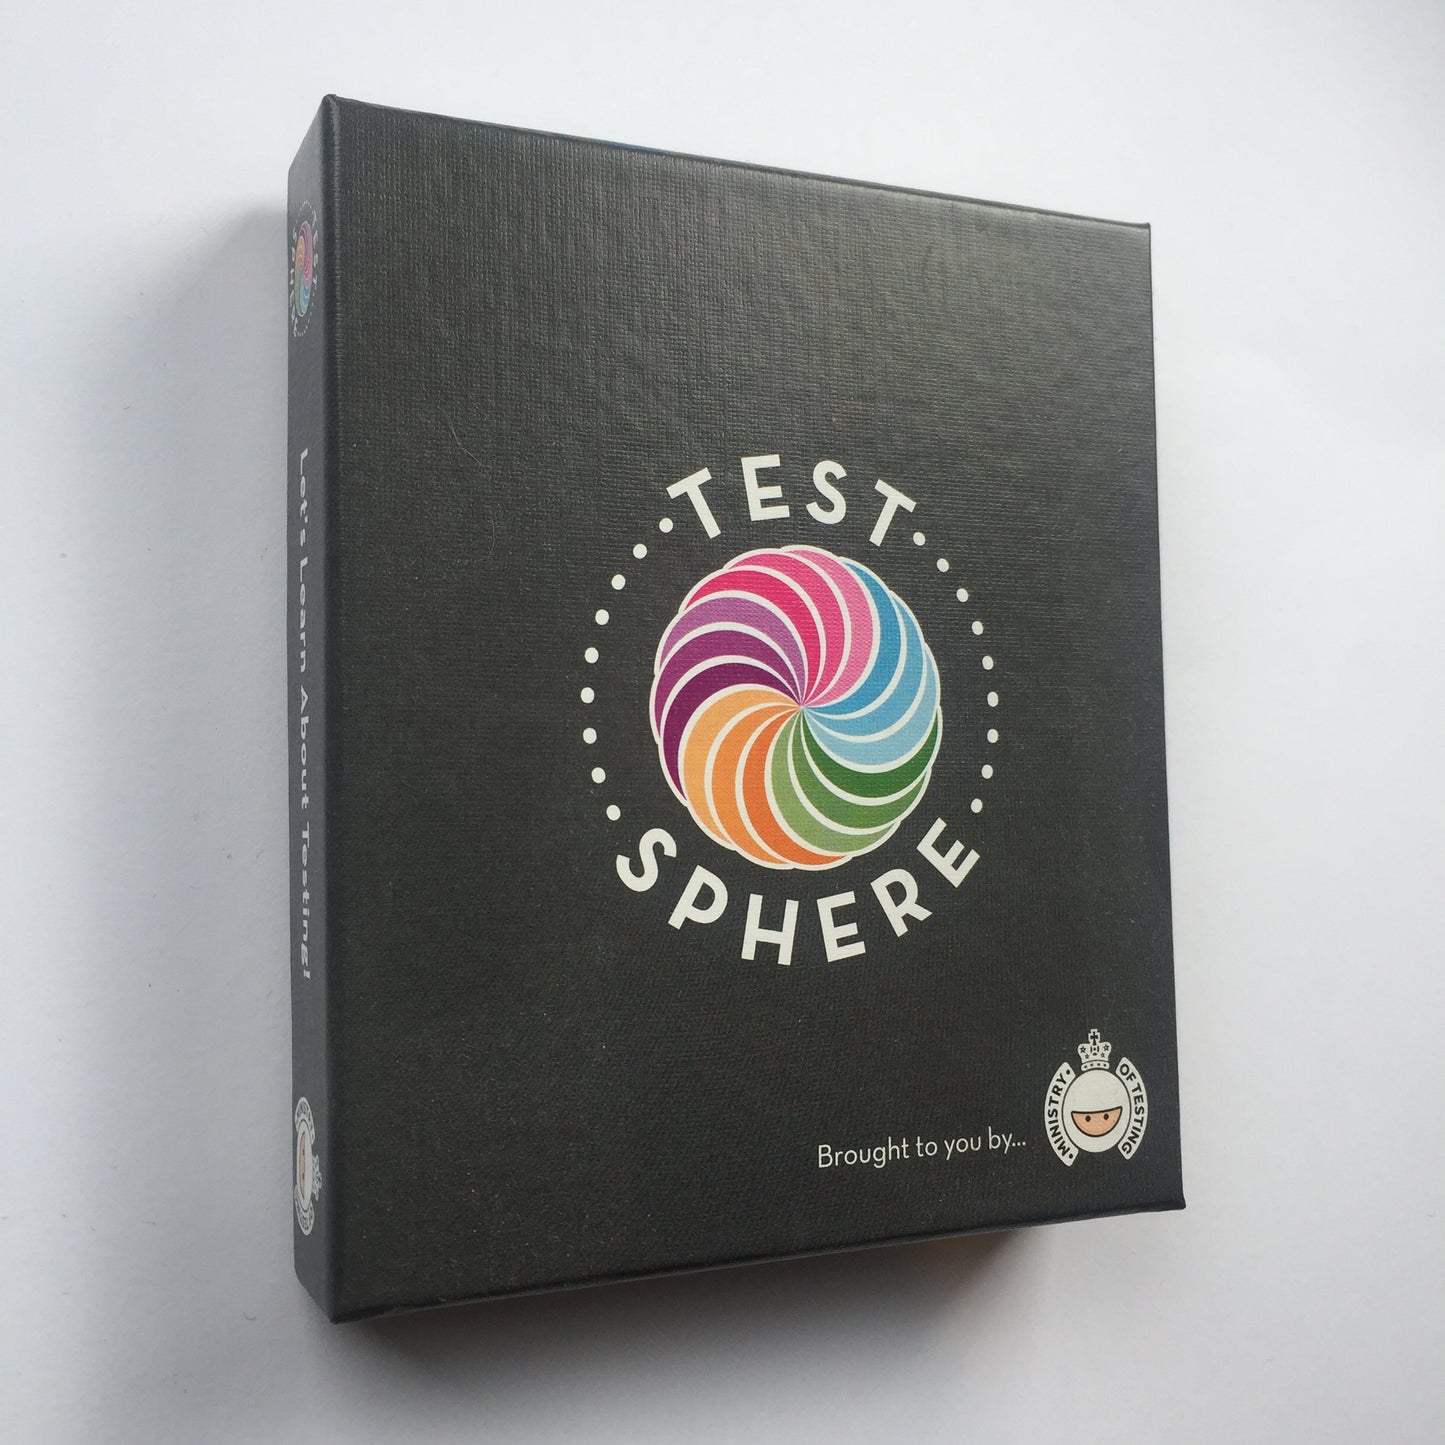 TestSphere - Expansion Pack (Local Pickup - NOT FOR DELIVERY)